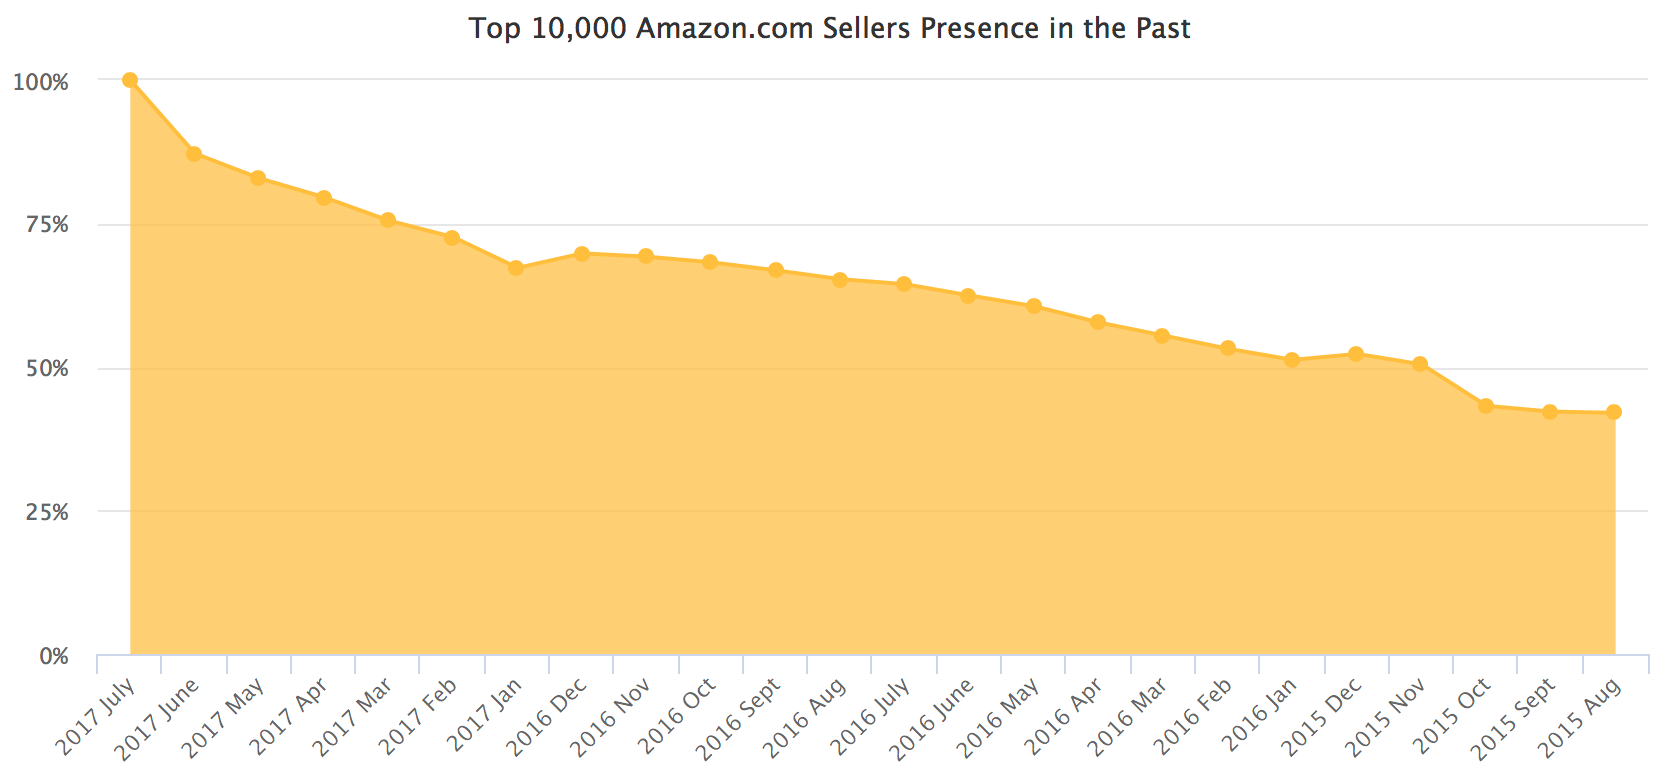 Top 10,000 Amazon.com Sellers Presence in the Past